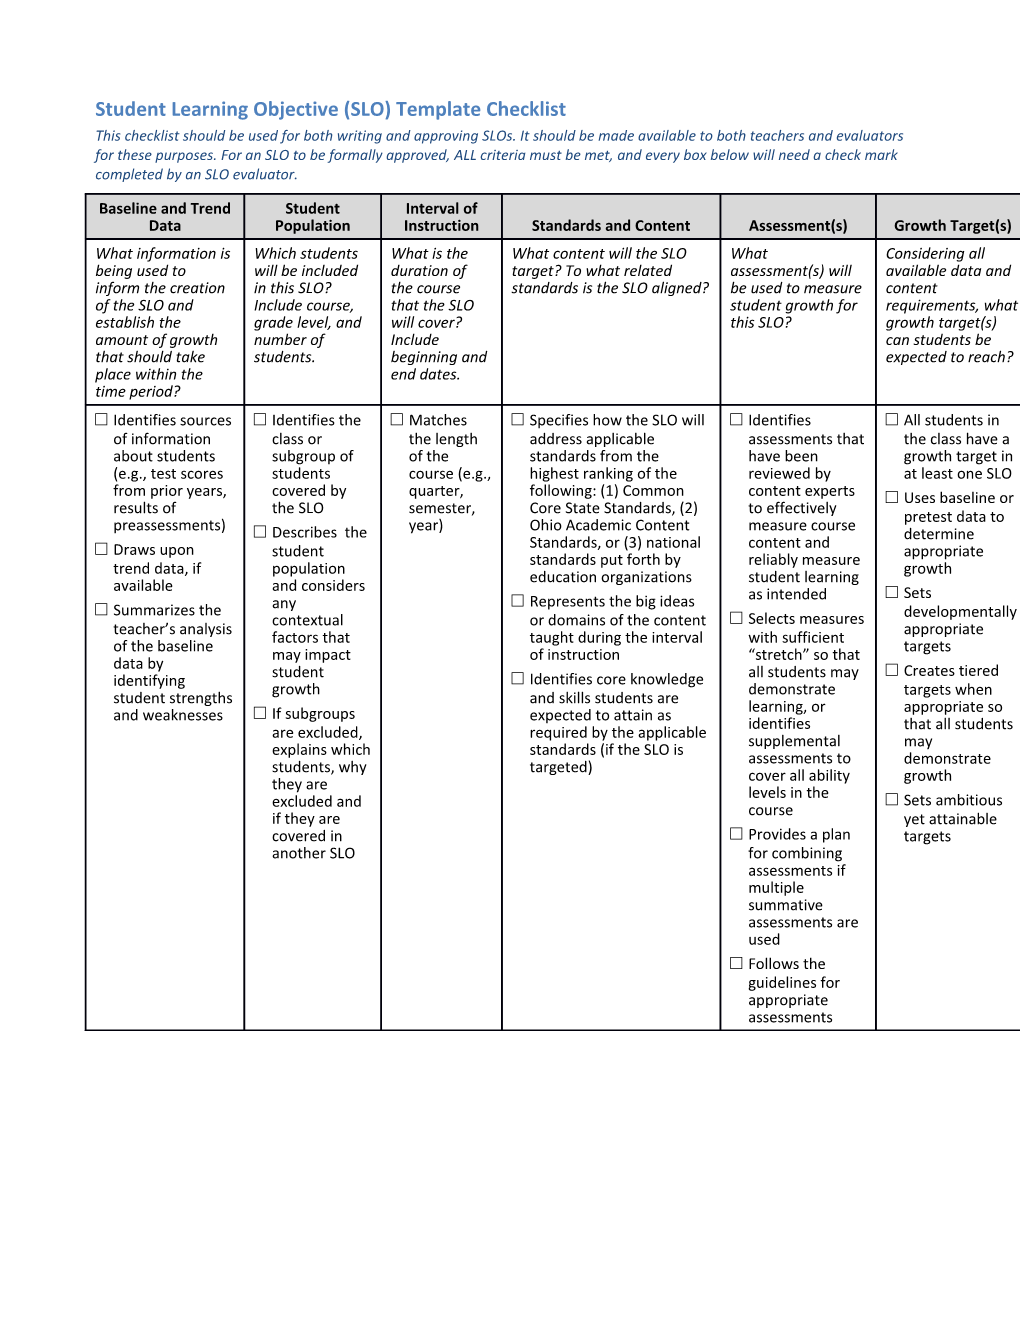 Student Learning Objective (SLO) Template Checklist